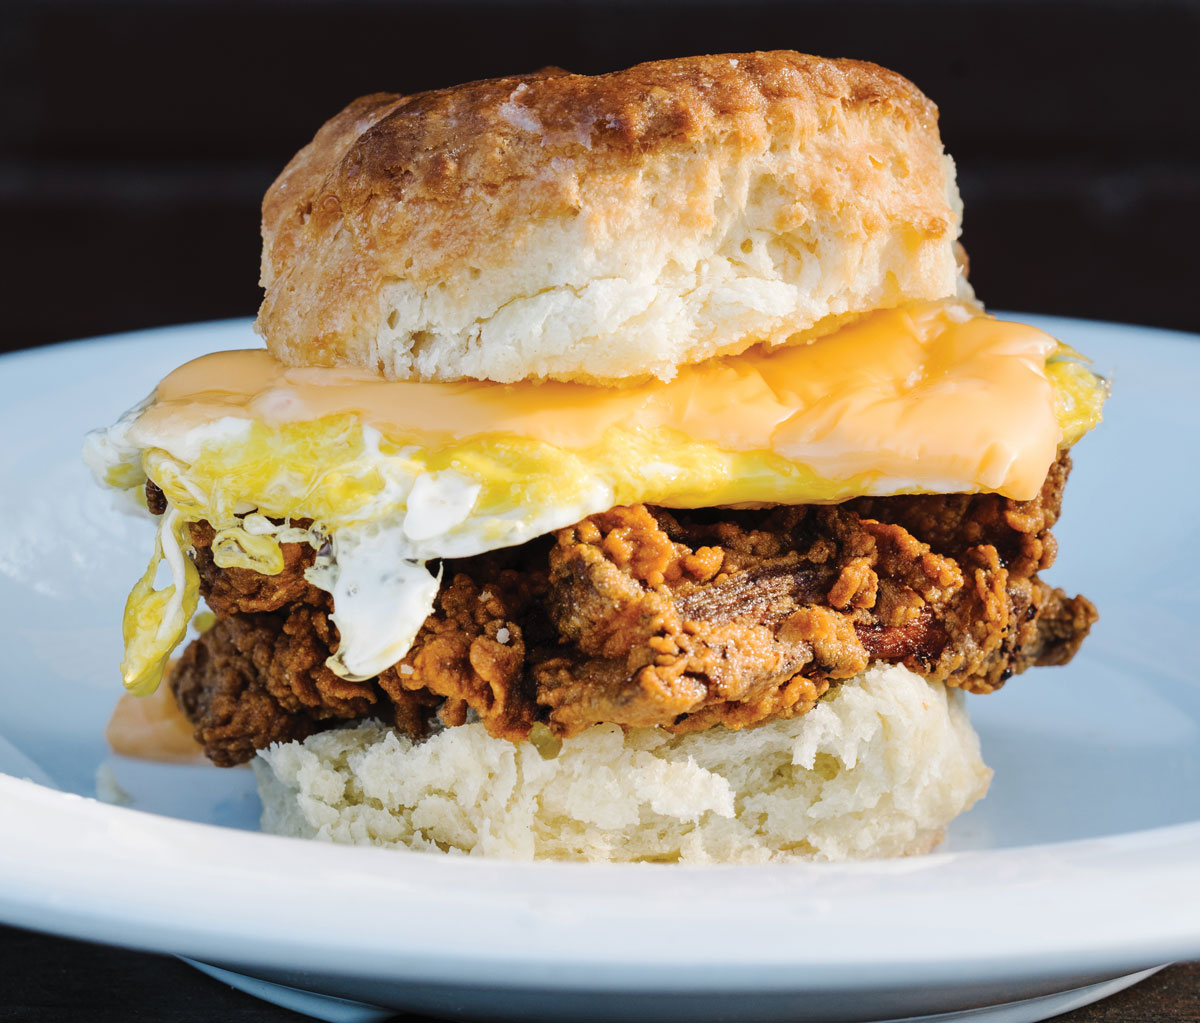 Fried chicken biscuit topped with egg and cheese from Bomb Biscuit in Atlanta